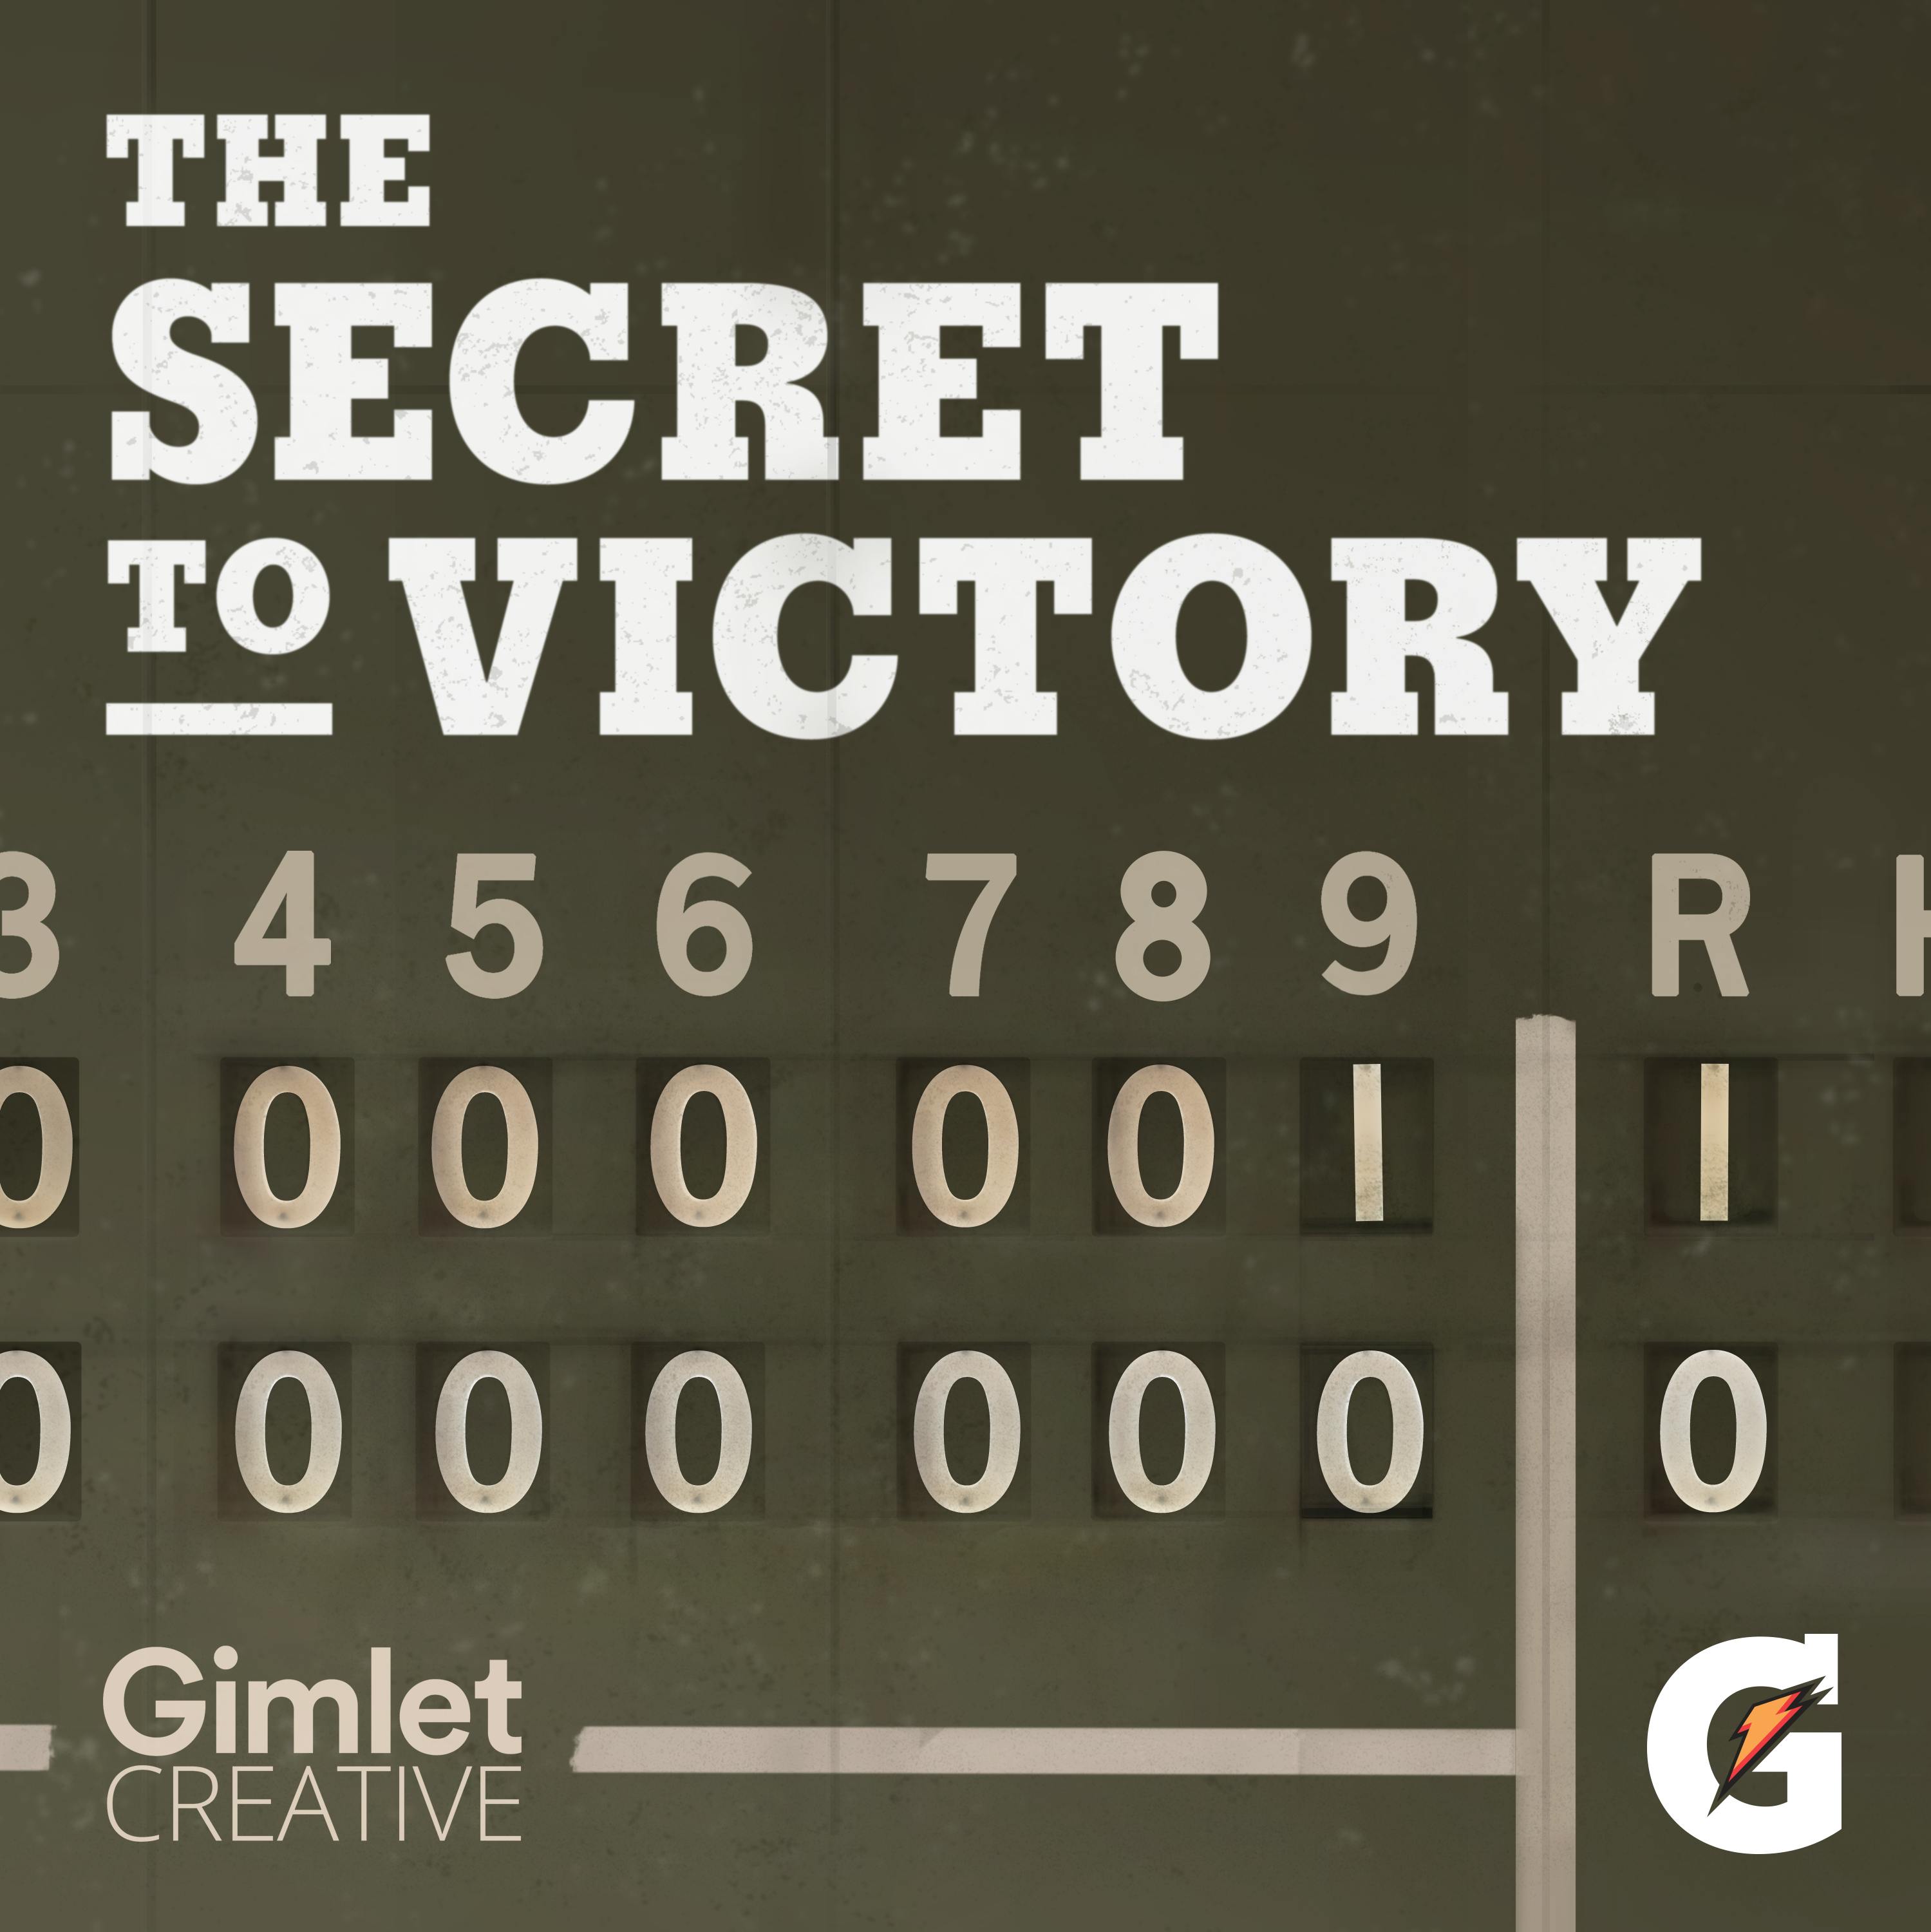 Introducing: The Secret to Victory